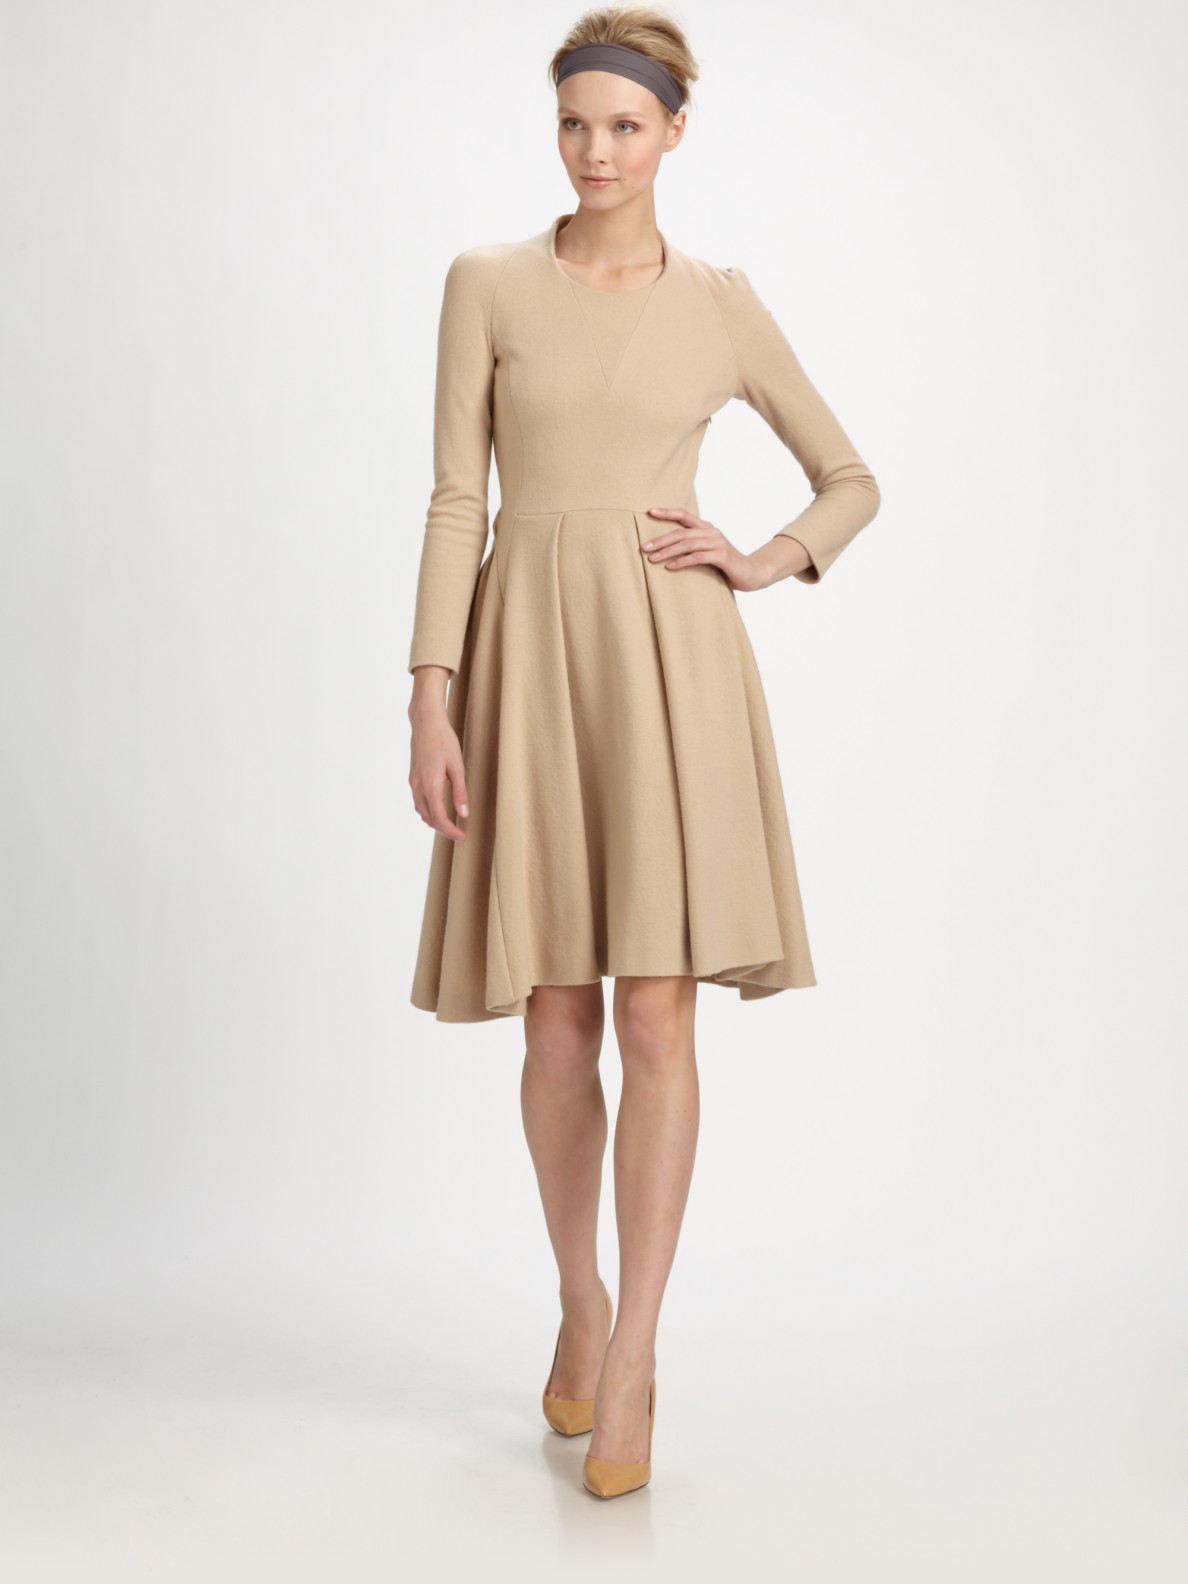 Lyst - Cacharel Wool Dress in Natural